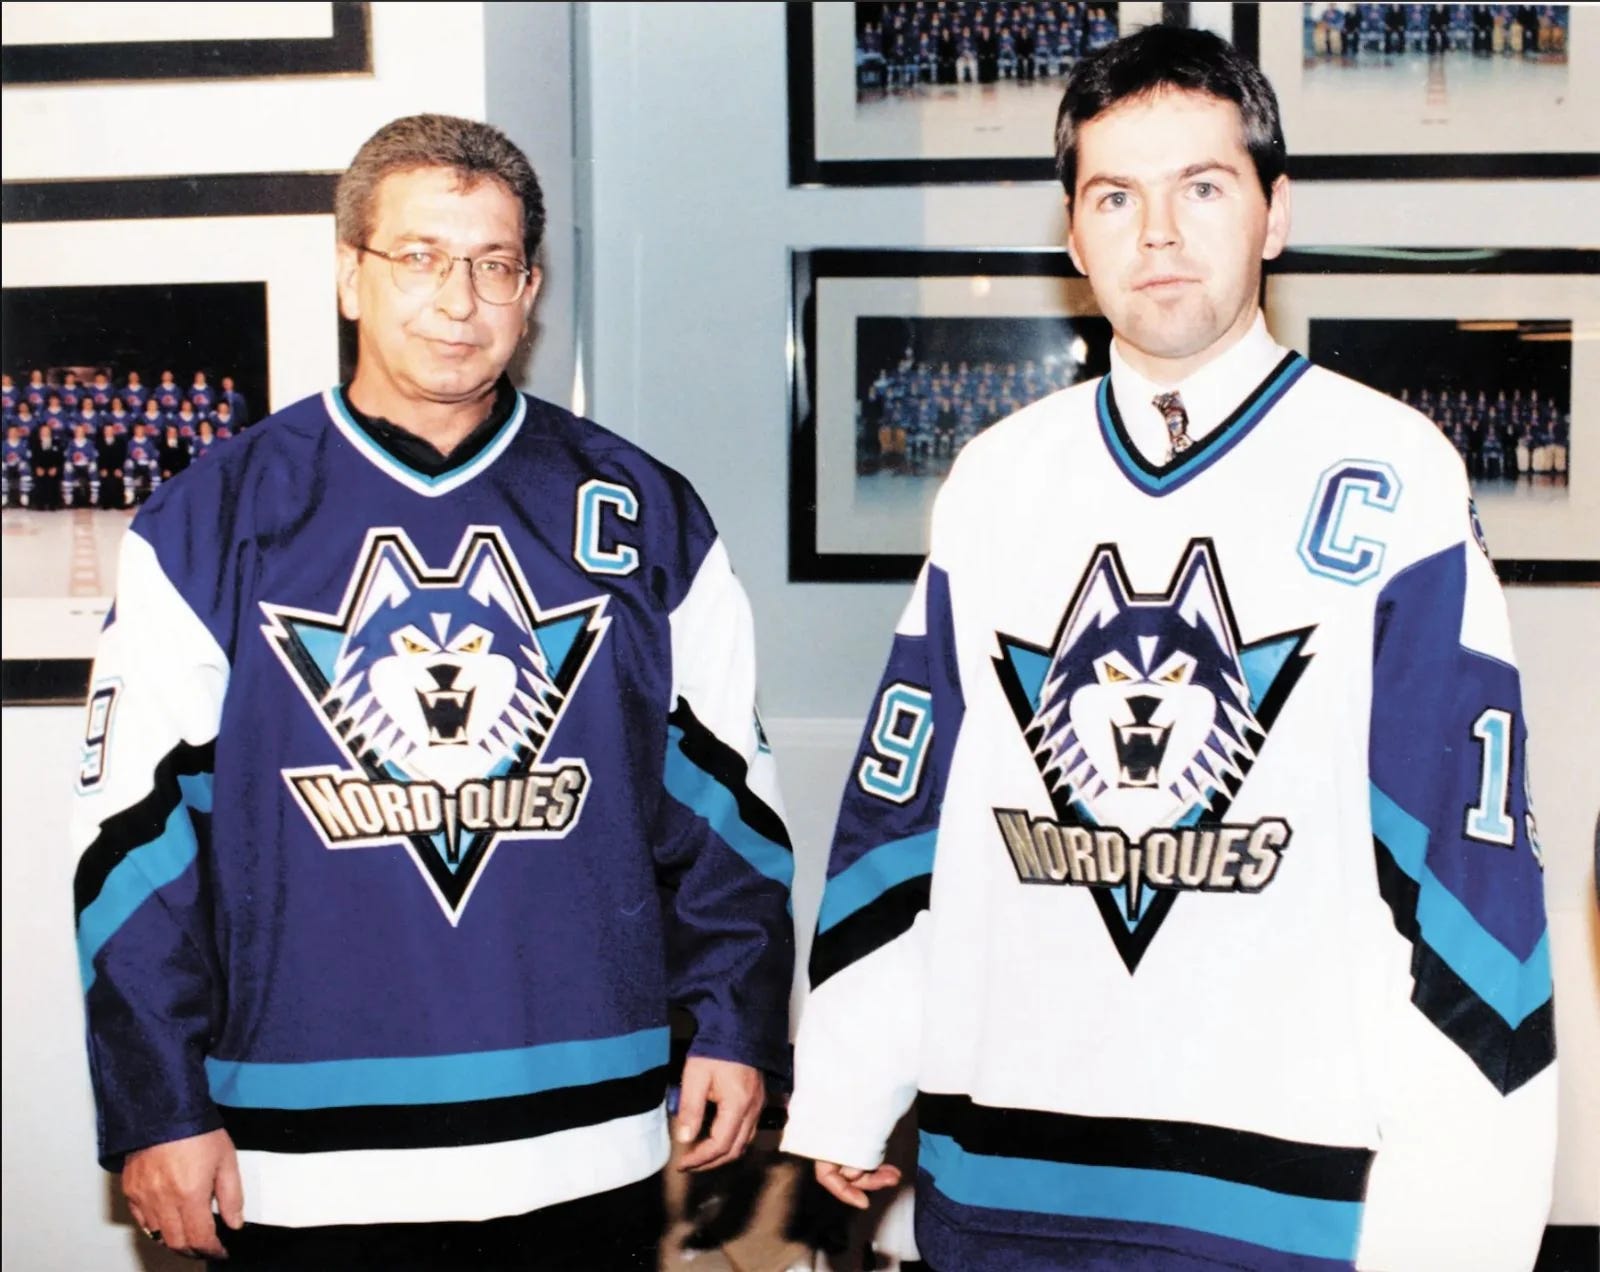 Quebec Nordiques 1992 Sublimated Hockey Uniforms | YoungSpeeds Away